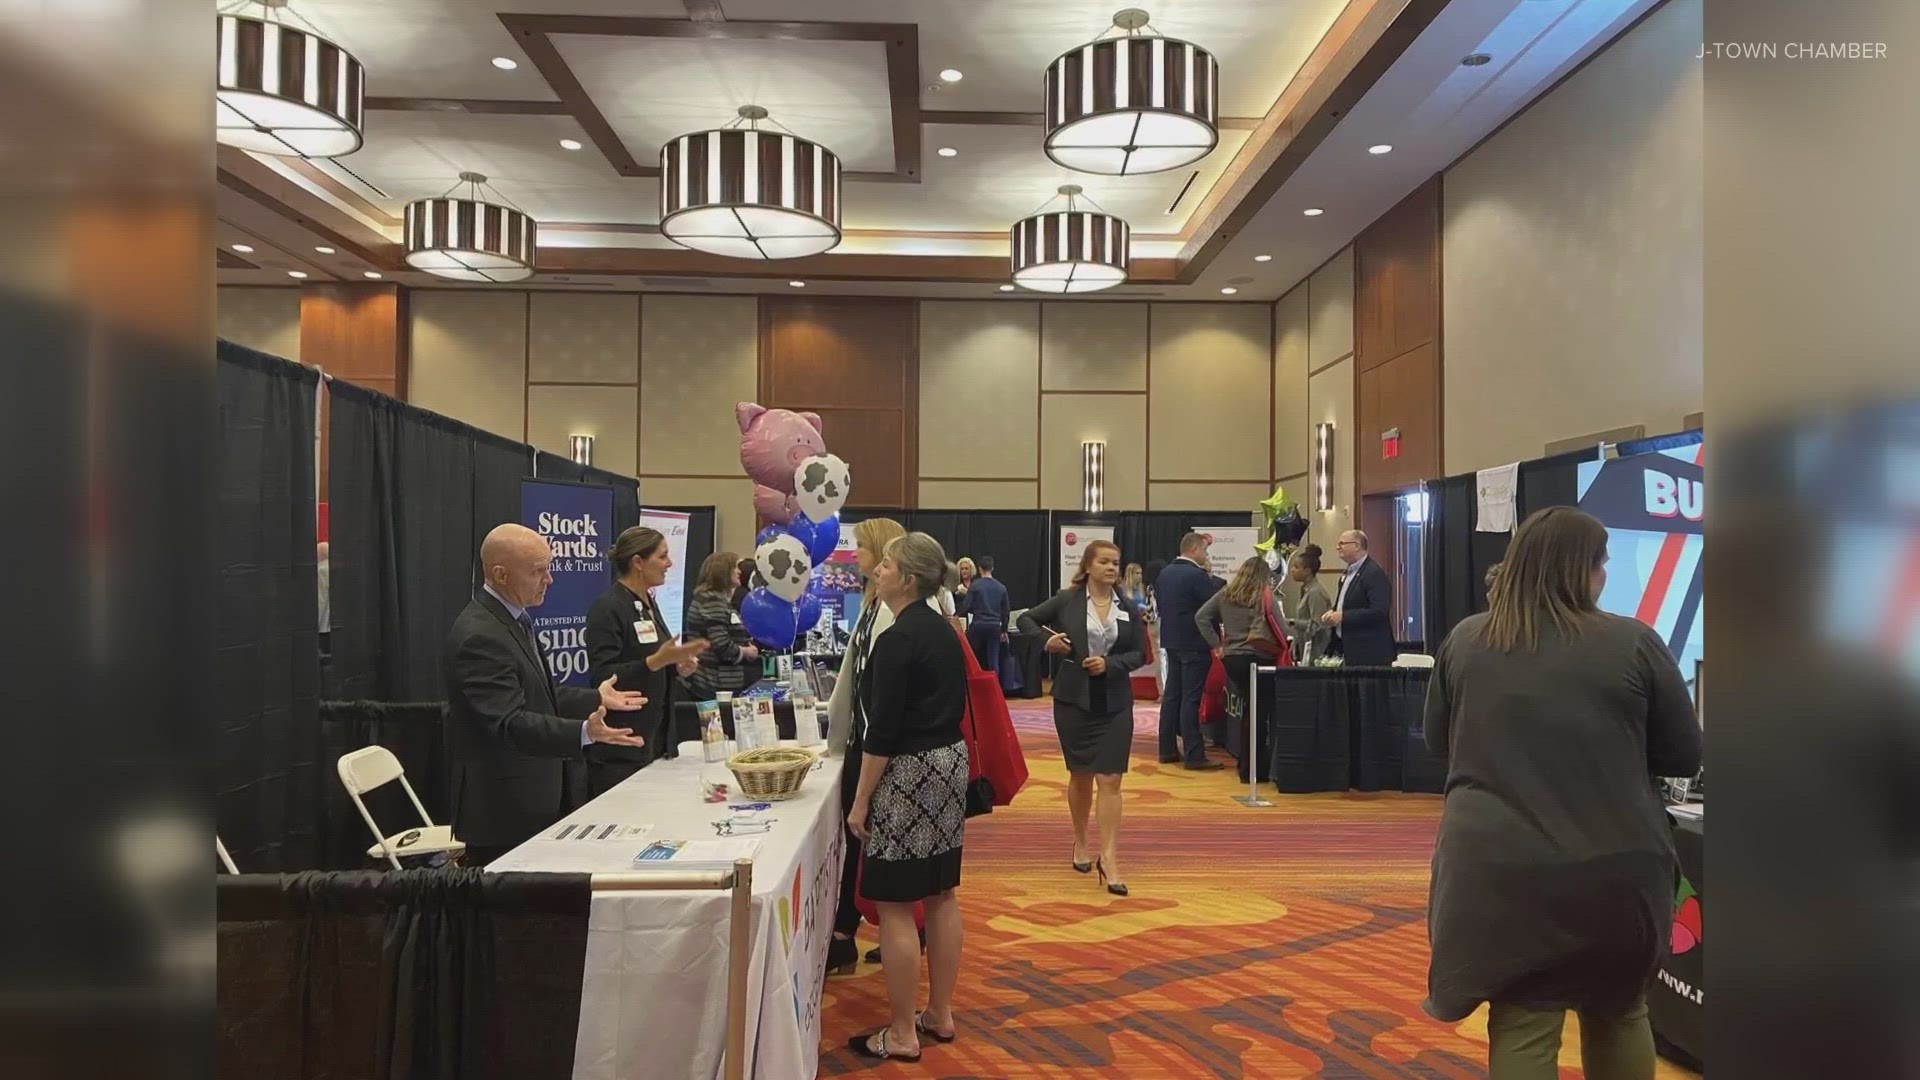 The Jeffersontown Business Expo is on Tuesday, April 16 from 11:30 a.m. to 2:30 p.m. at the Louisville Marriott East.